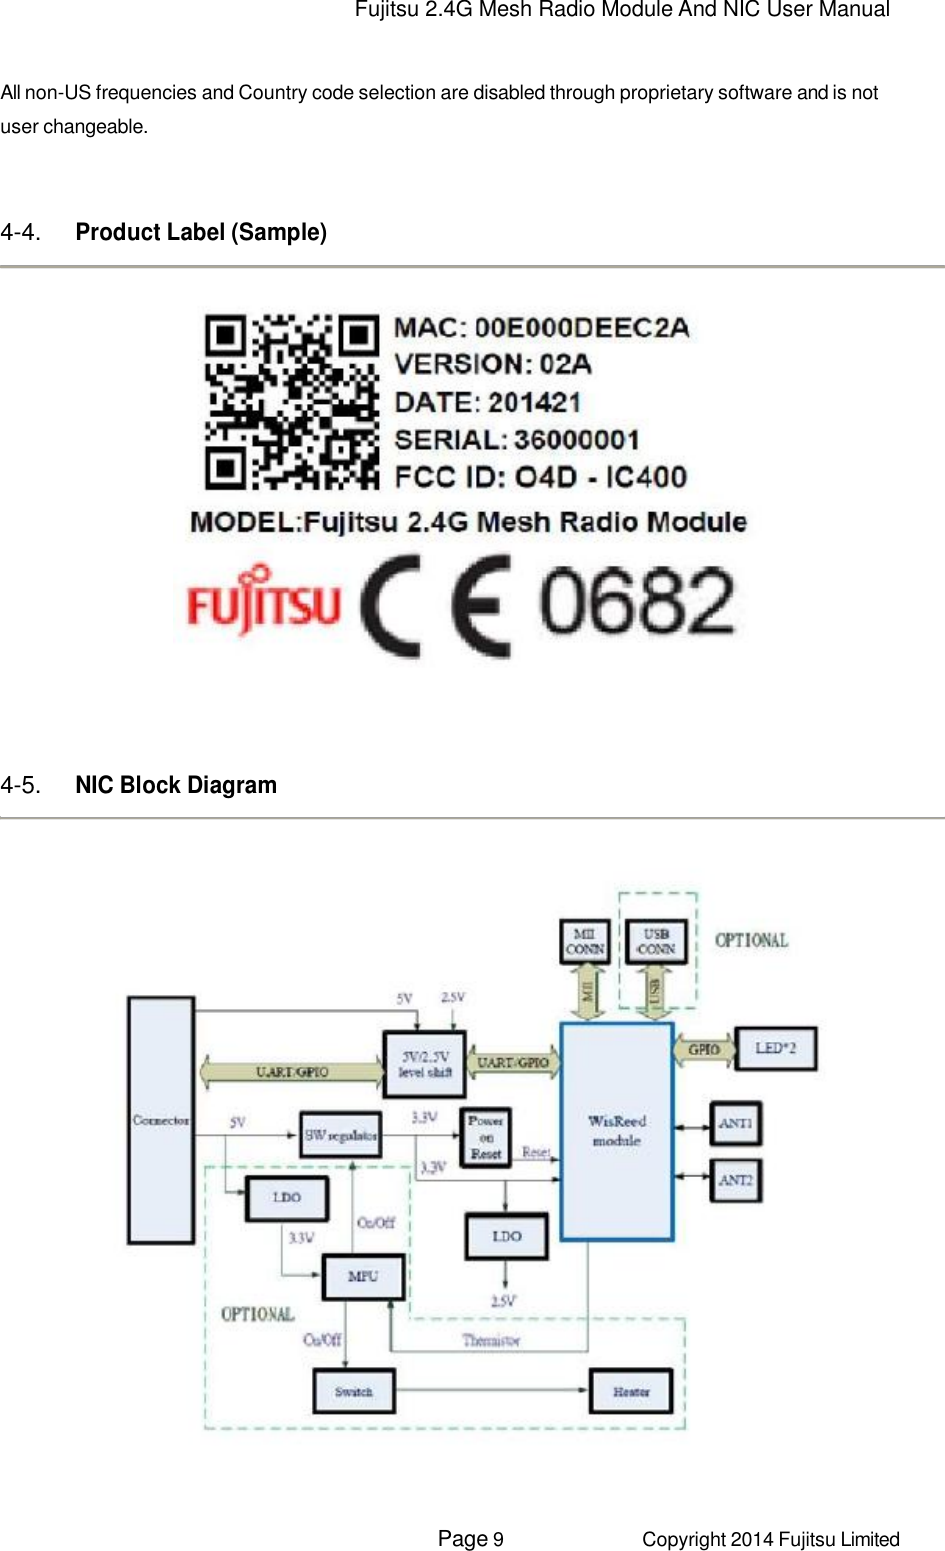   Fujitsu 2.4G Mesh Radio Module And NIC User Manual   All non-US frequencies and Country code selection are disabled through proprietary software and is not user changeable.    4-4. Product Label (Sample)                      4-5. NIC Block Diagram                              Page 9 Copyright 2014 Fujitsu Limited                                                                                                                                                   